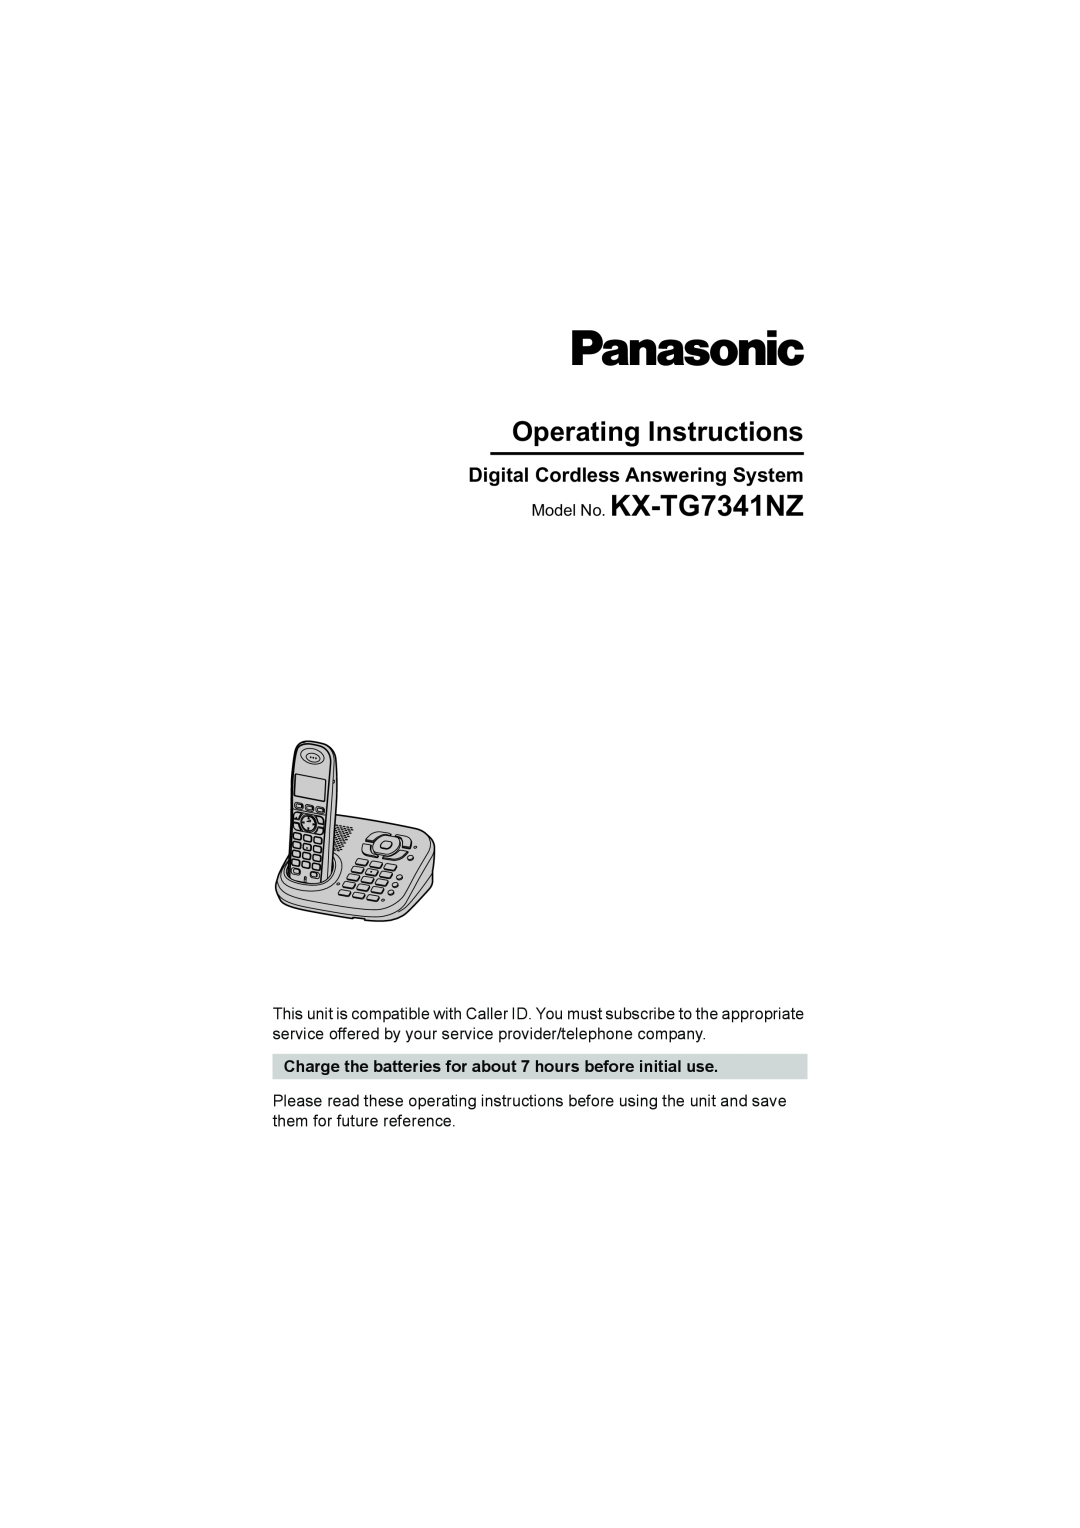 Panasonic KX-TG7341NZ operating instructions Charge the batteries for about 7 hours before initial use 